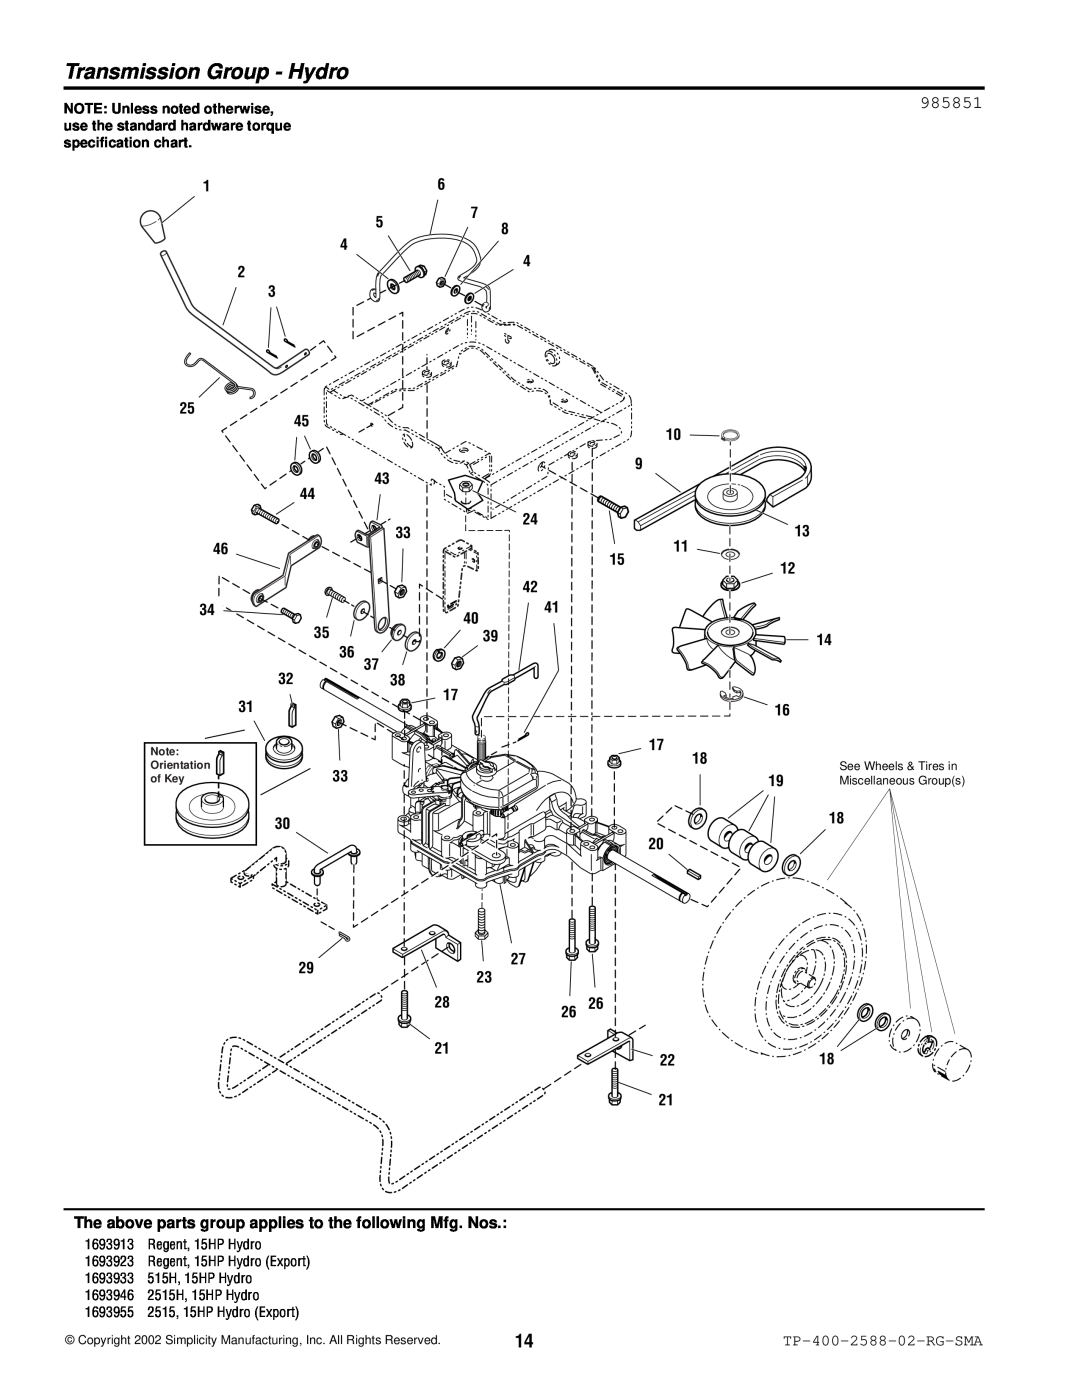 Simplicity 500 Series Transmission Group - Hydro, 985851, 2318, The above parts group applies to the following Mfg. Nos 